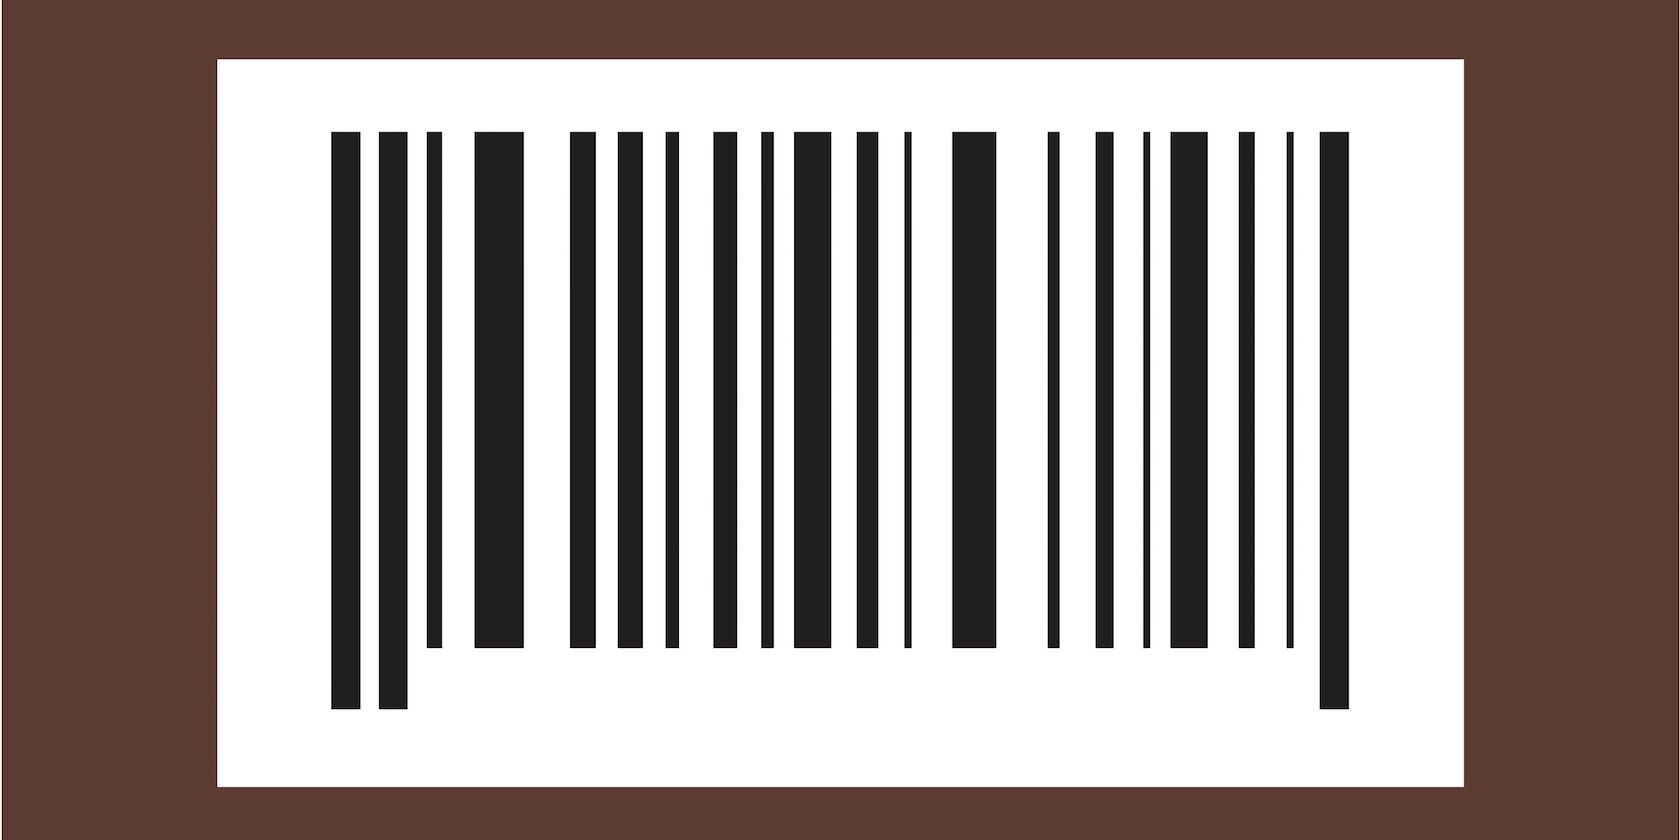 free-online-barcode-decoder-can-read-all-common-barcode-formats